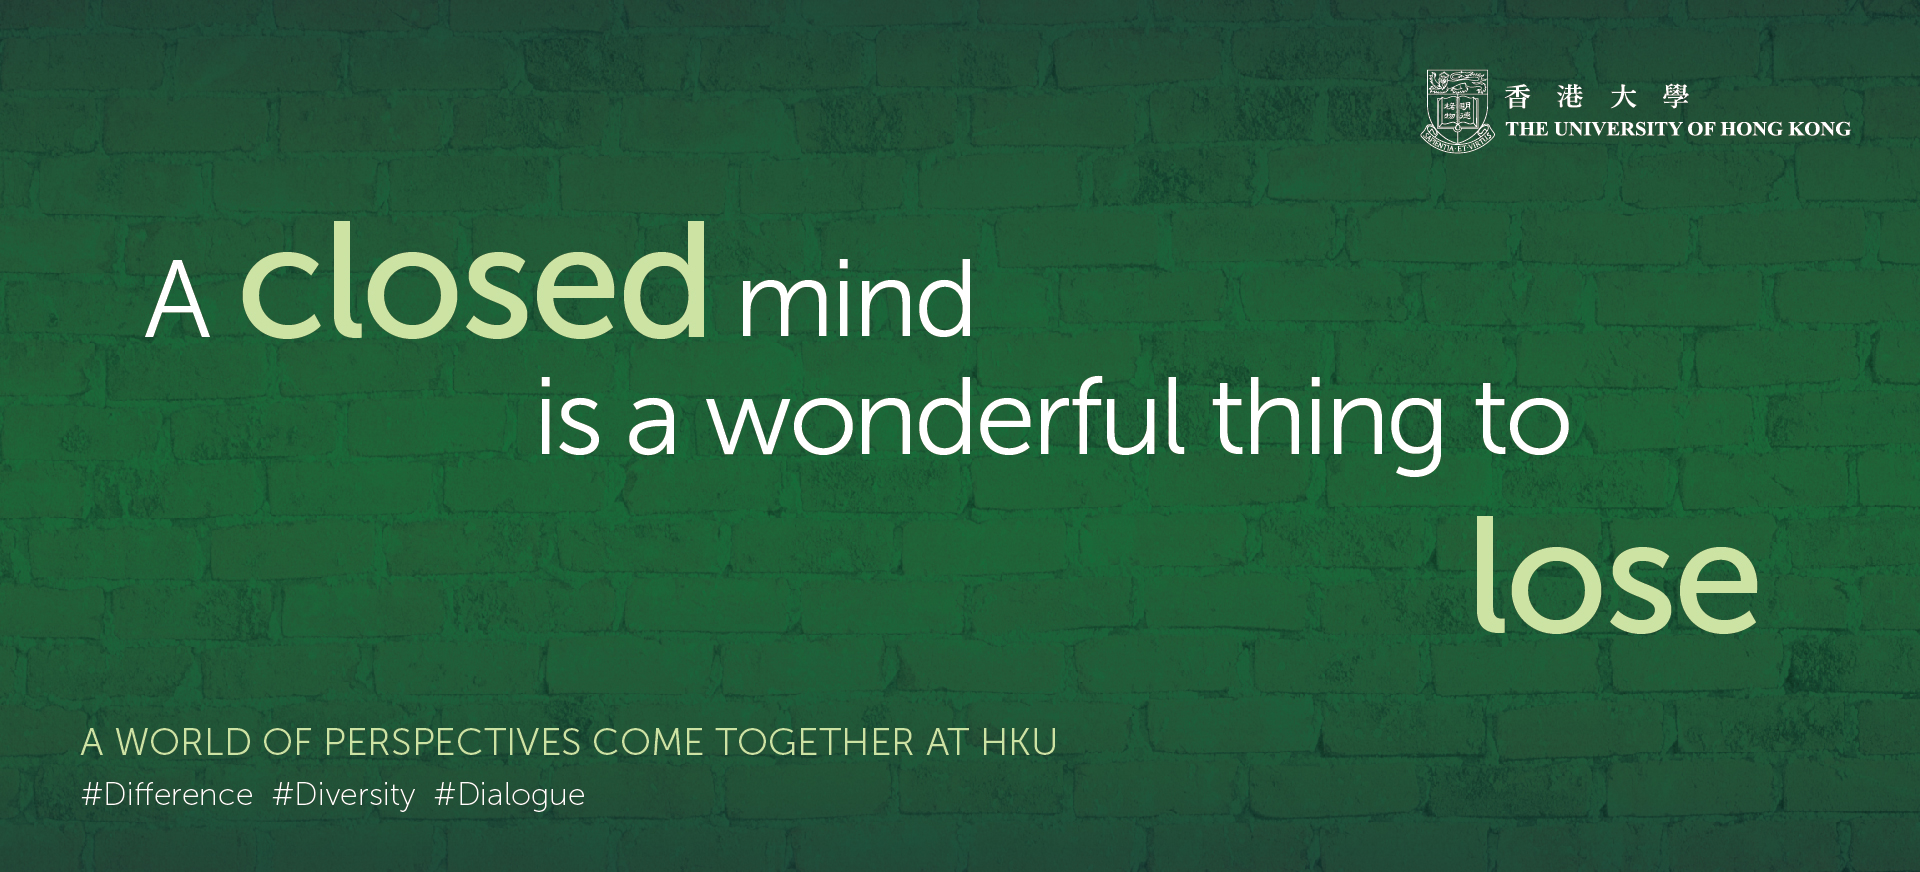 A World of Persepectives Come Together at HKU - A closed mind...